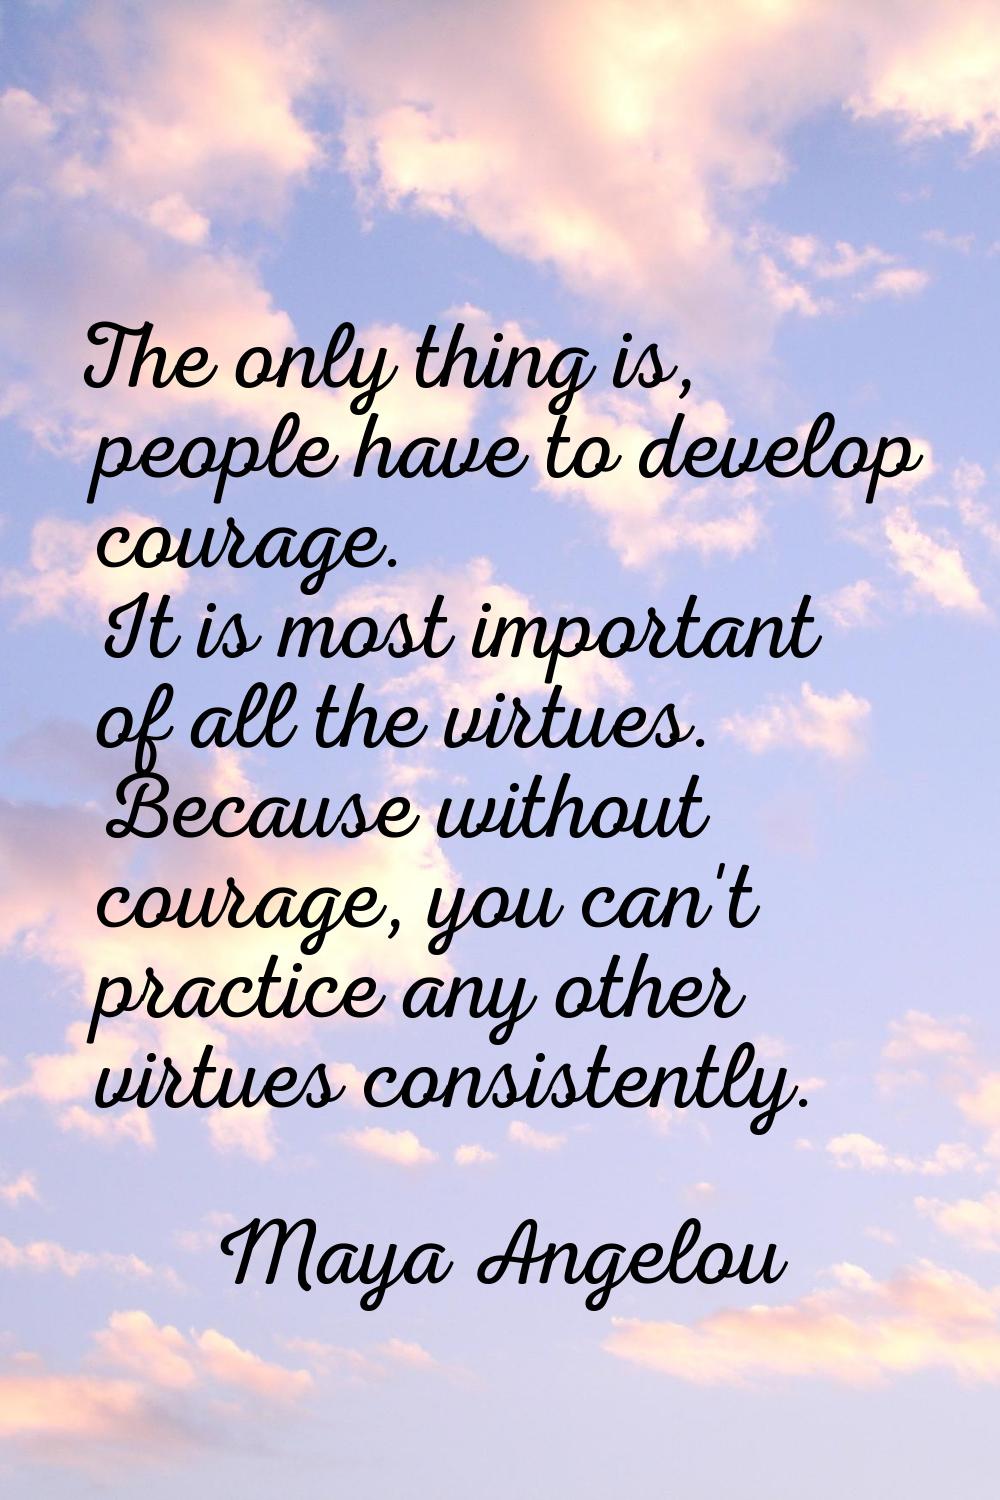 The only thing is, people have to develop courage. It is most important of all the virtues. Because